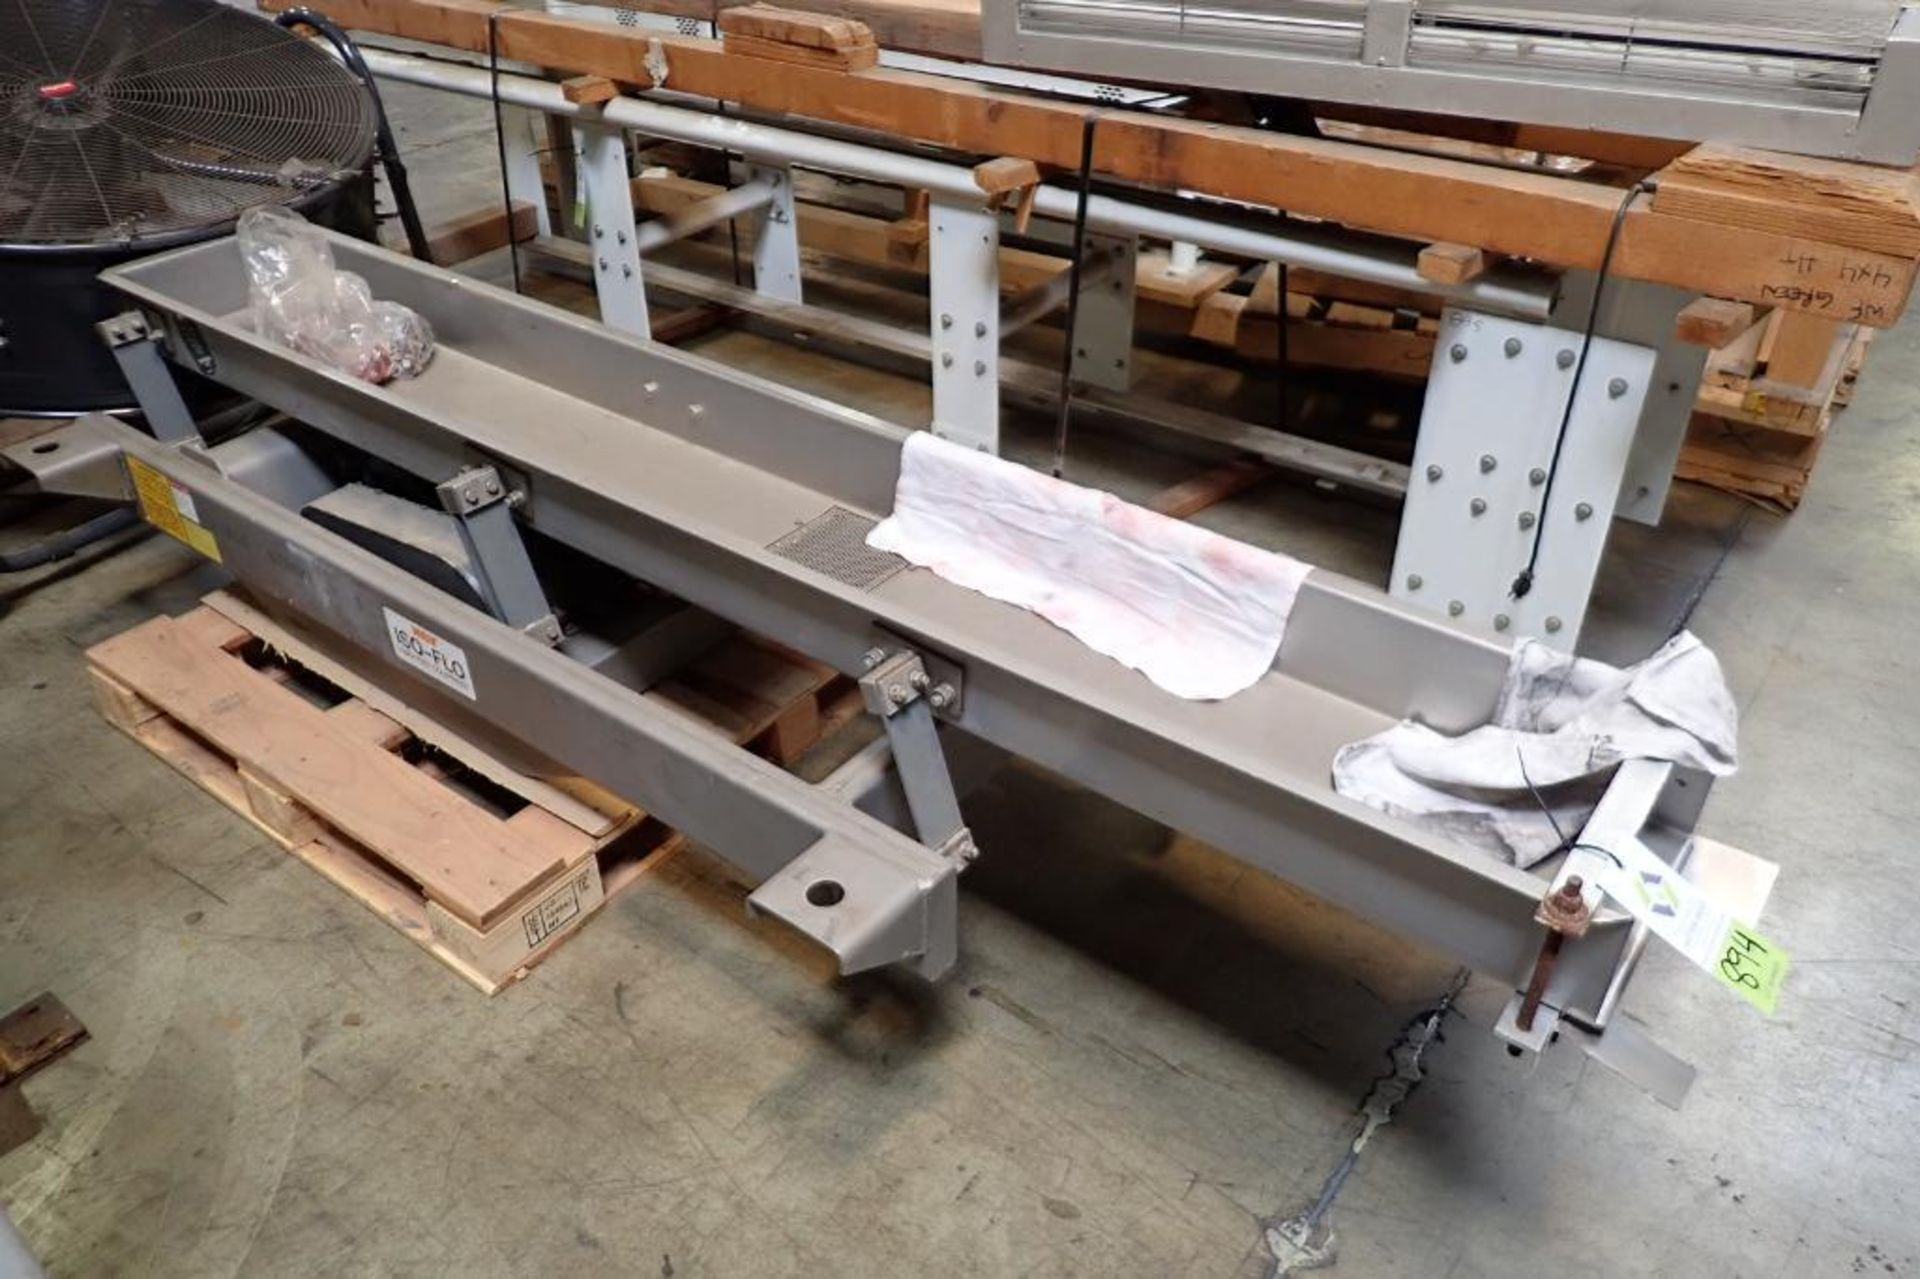 Key vibratory conveyor, 92 in. long x 12 in. wide x 6 in. deep, no frame. **Rigging Fee: $100**